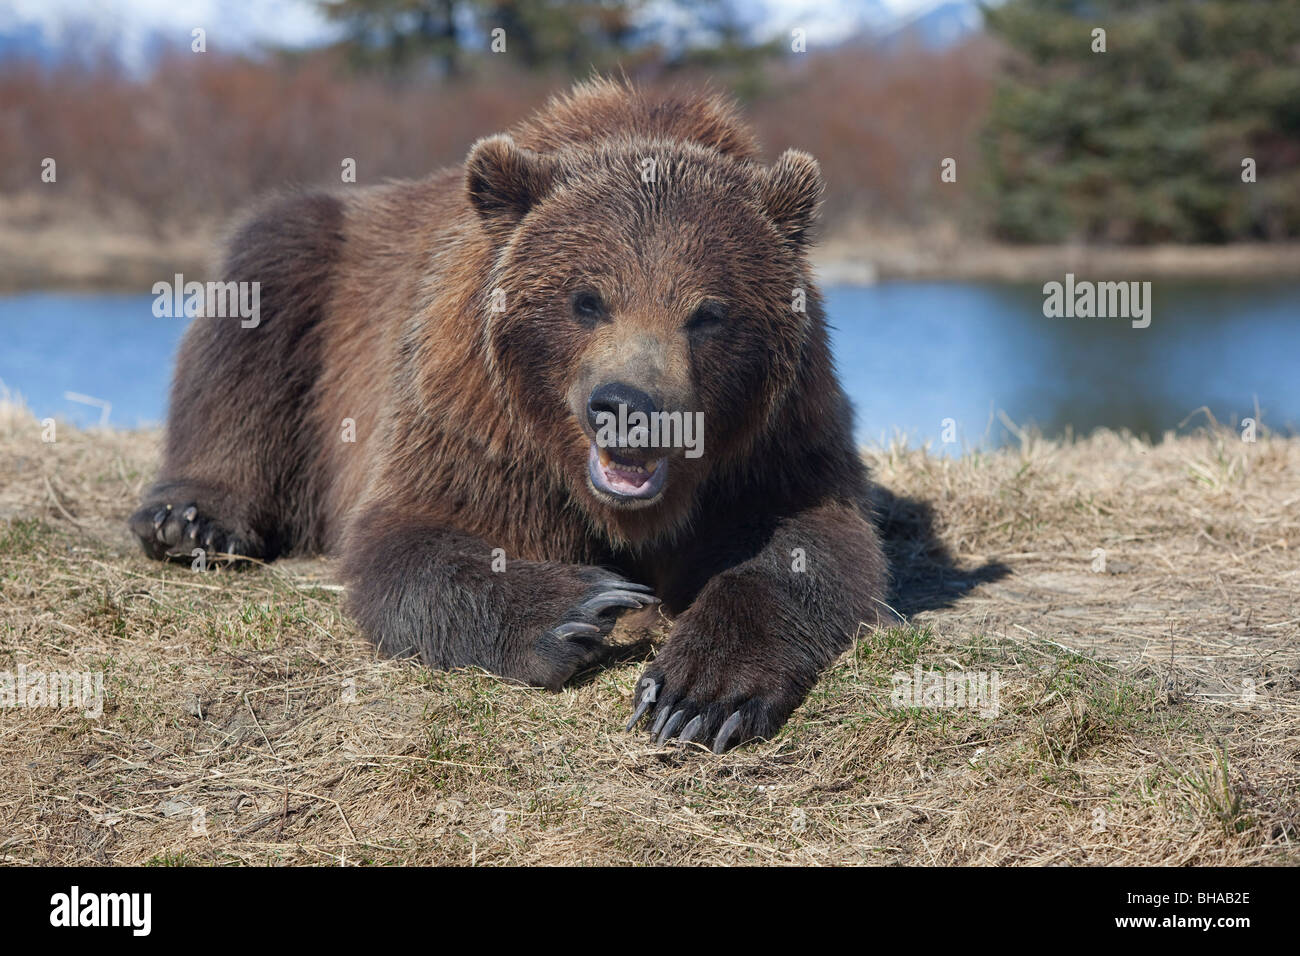 Grizzly bear laying in grass and snarling, Alaska Wildlife Conservation Center, Southcentral, Spring, CAPTIVE Stock Photo